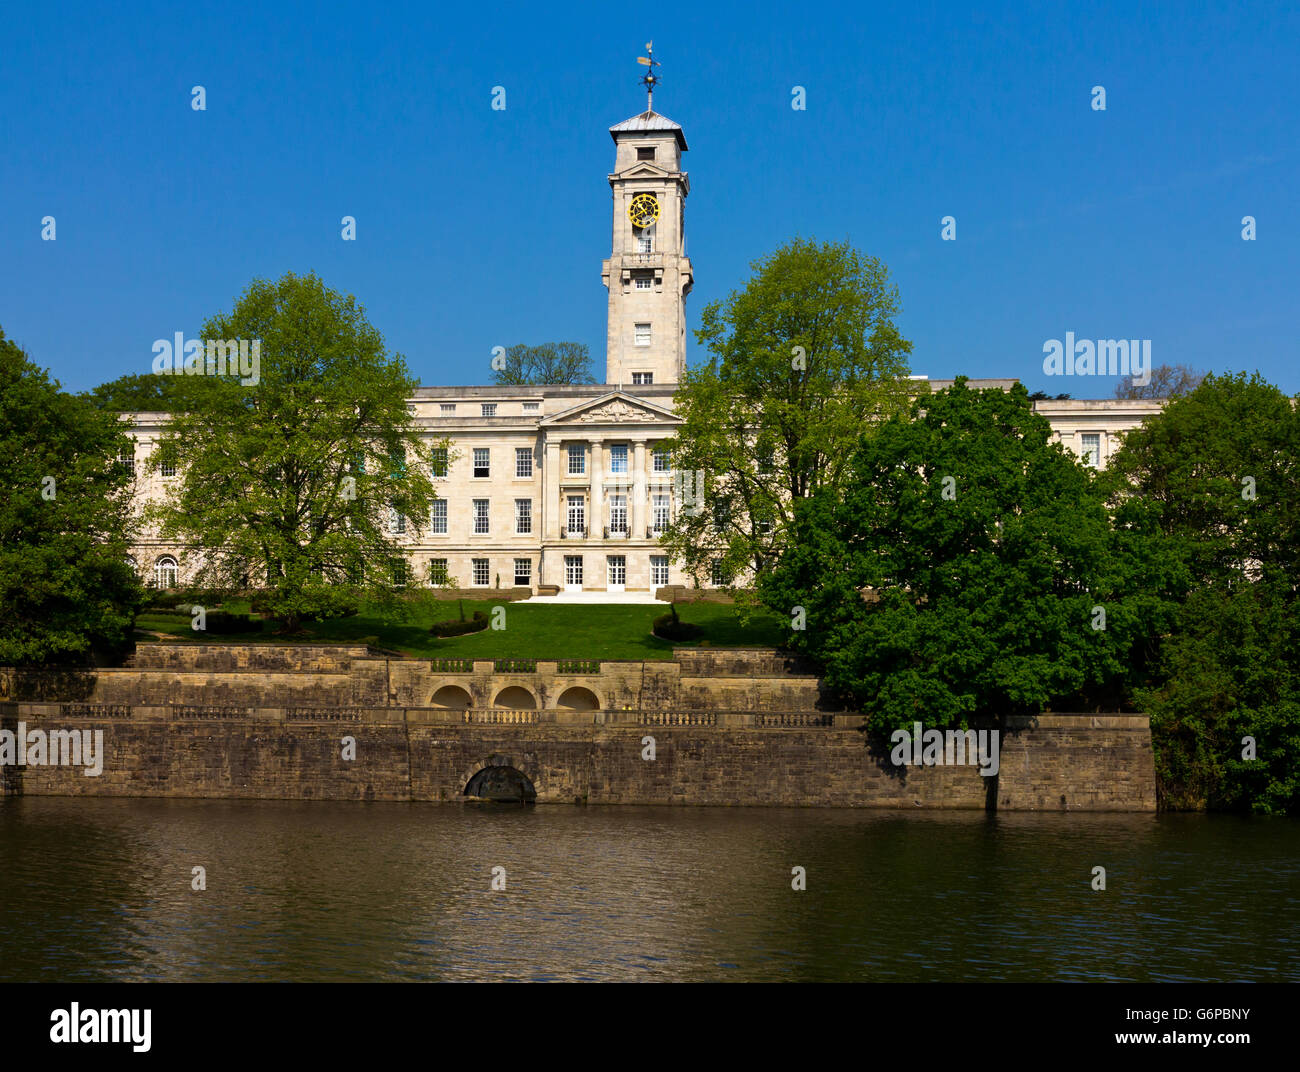 View of Trent Building at the University of Nottingham Nottinghamshire England UK designed by Morley Horder and opened in 1928 Stock Photo